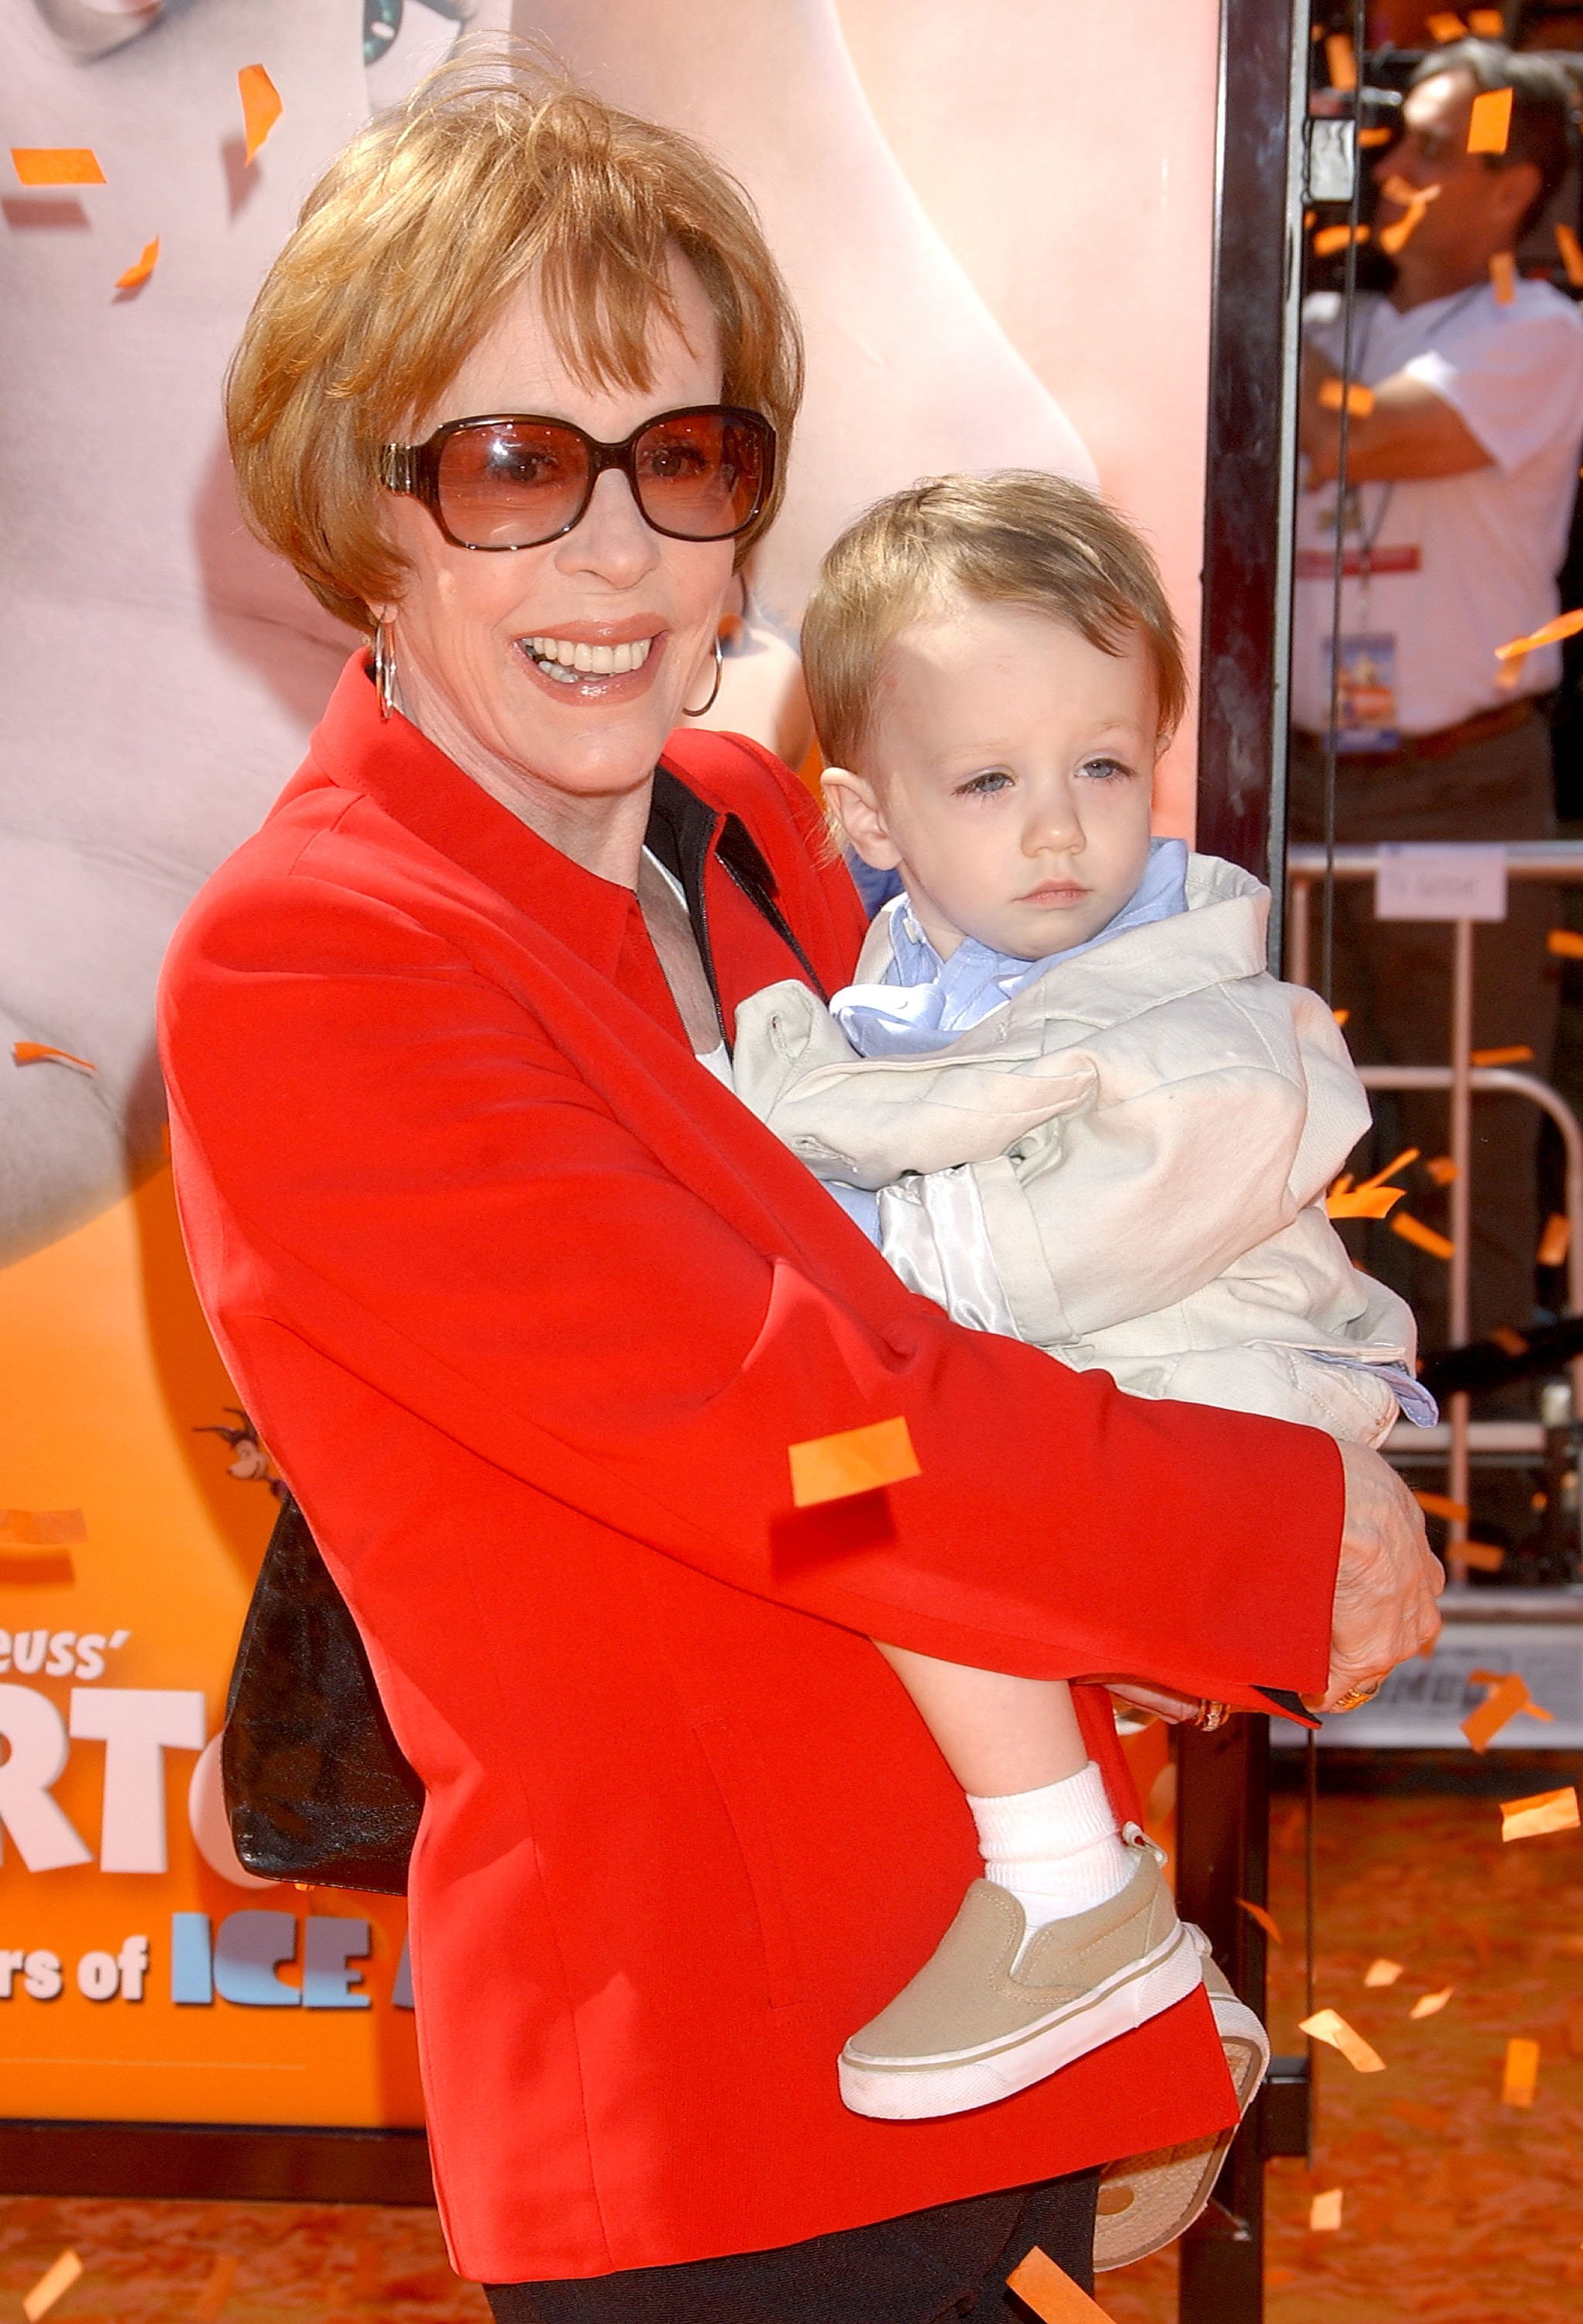 Actress Carol Burnett and grandson Dylan arrive at "Dr. Seuss' Horton Hears A Who" premiere at The Mann Village on March 8, 2008 in Westwood, California. | Source: Getty Images